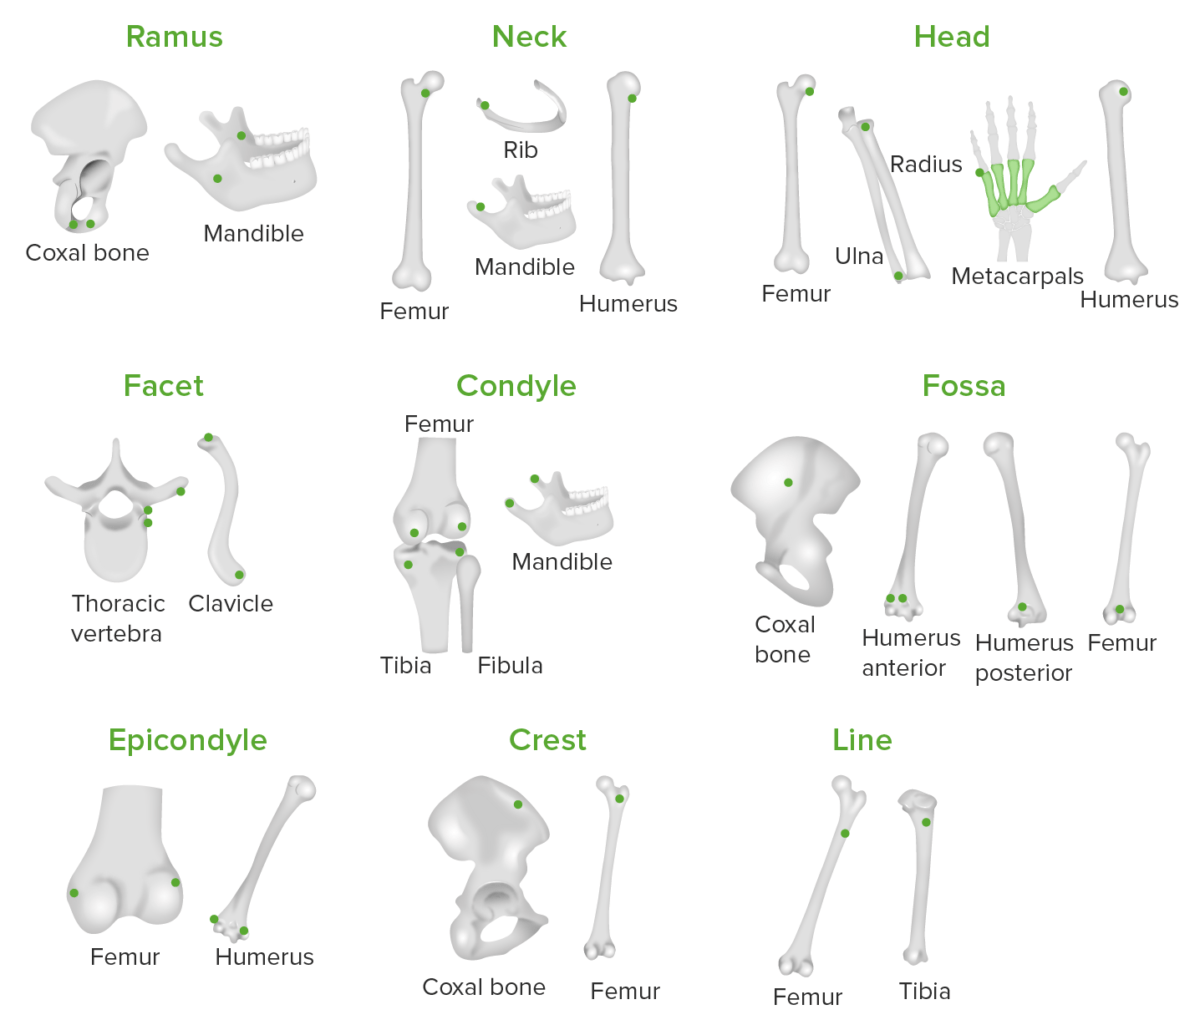 More types of bone markings on different bones in the body